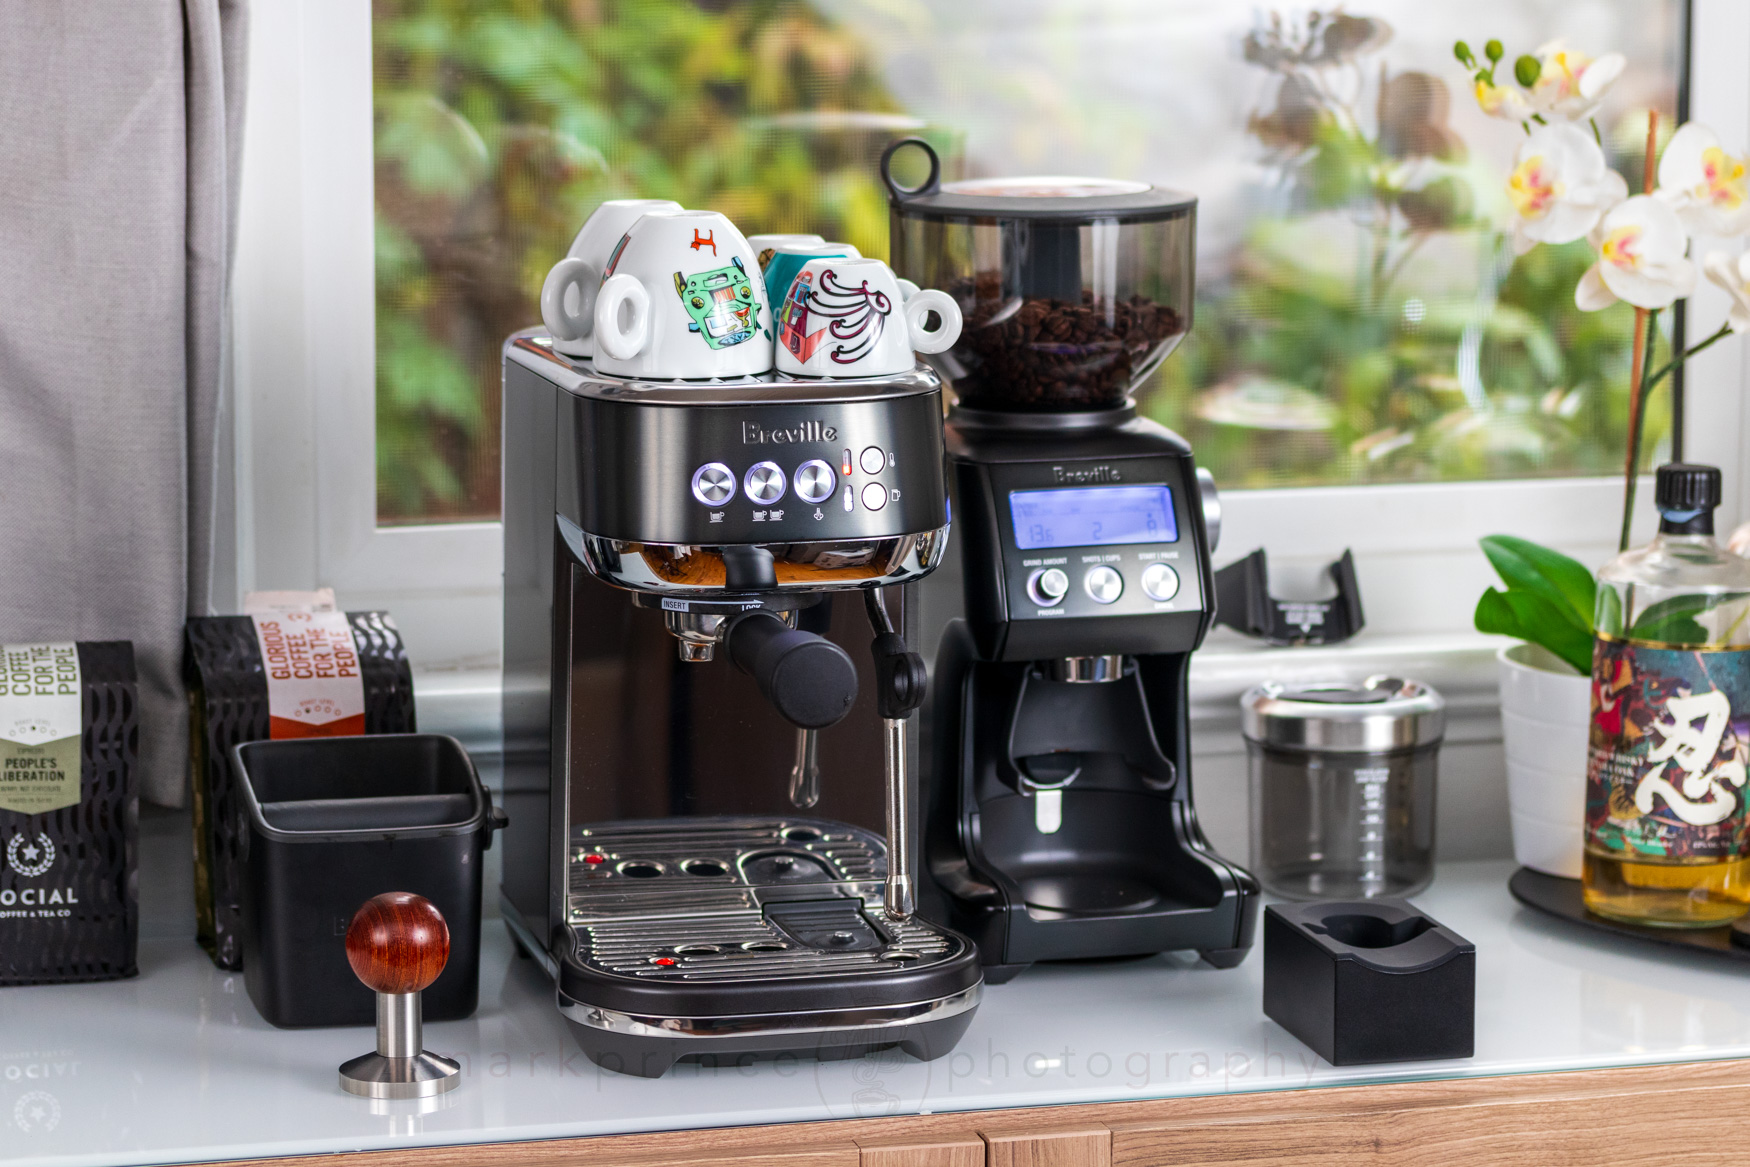 The Breville Bambino: The BEST Budget Espresso Machine? - Full Review 